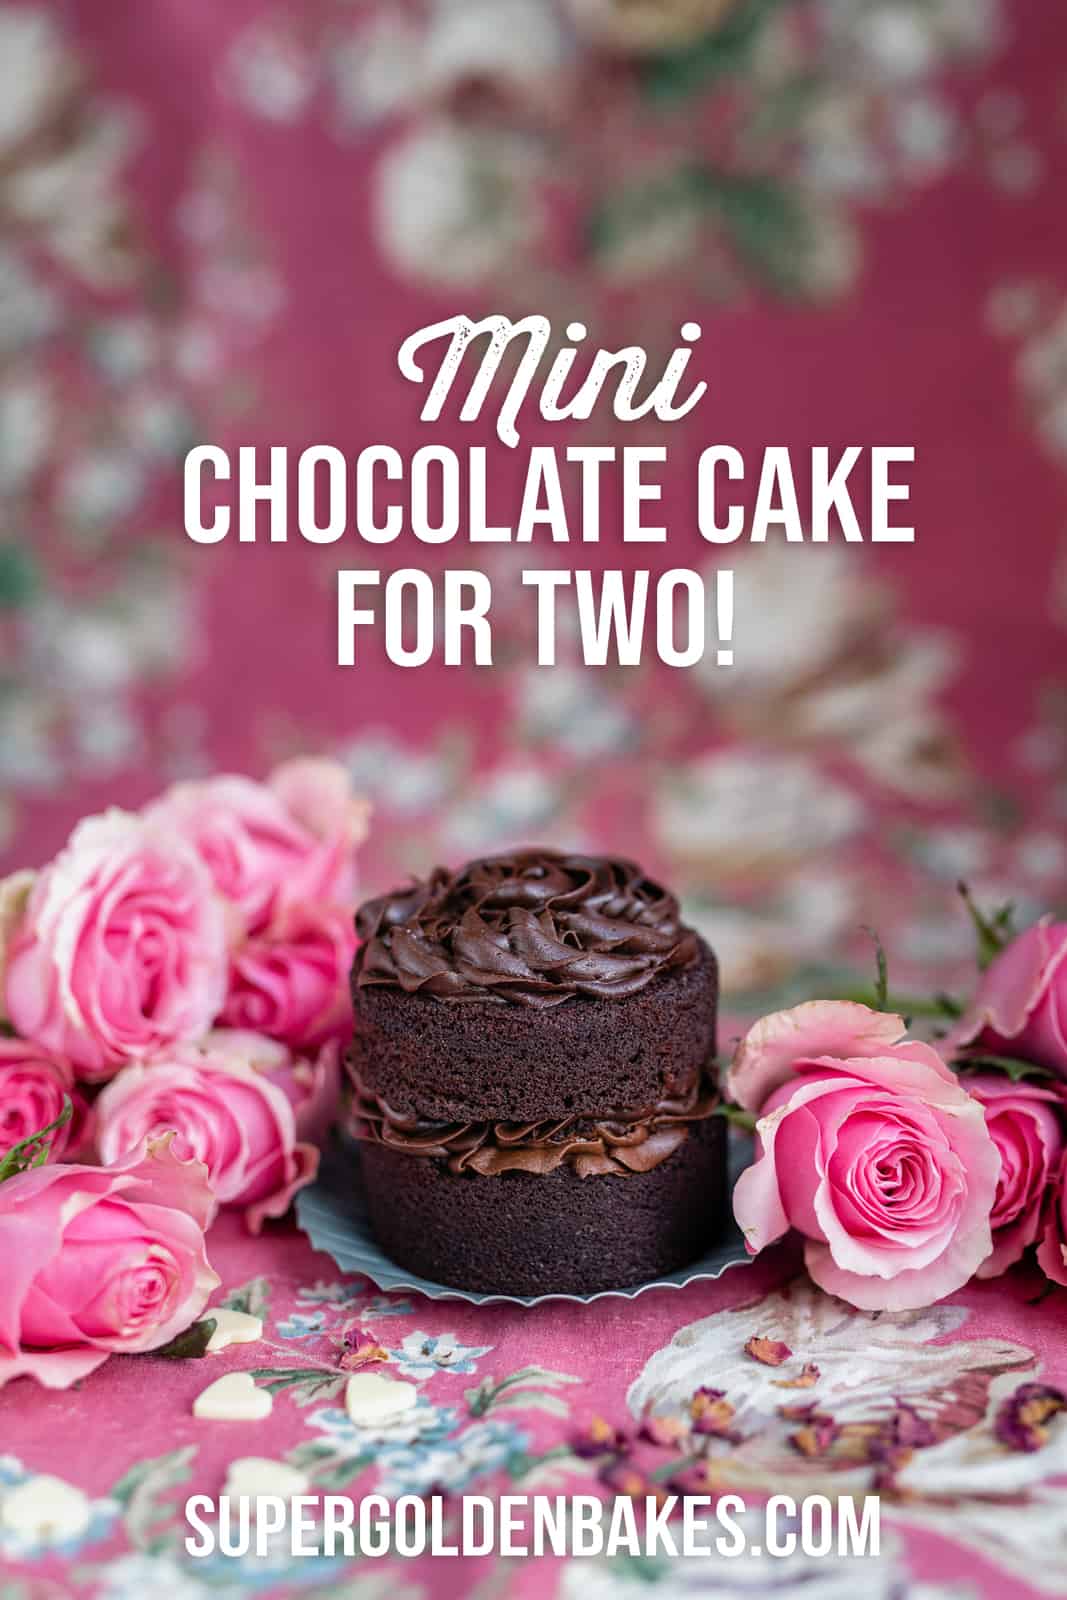 Mini chocolate layer cake on a floral background with pink roses